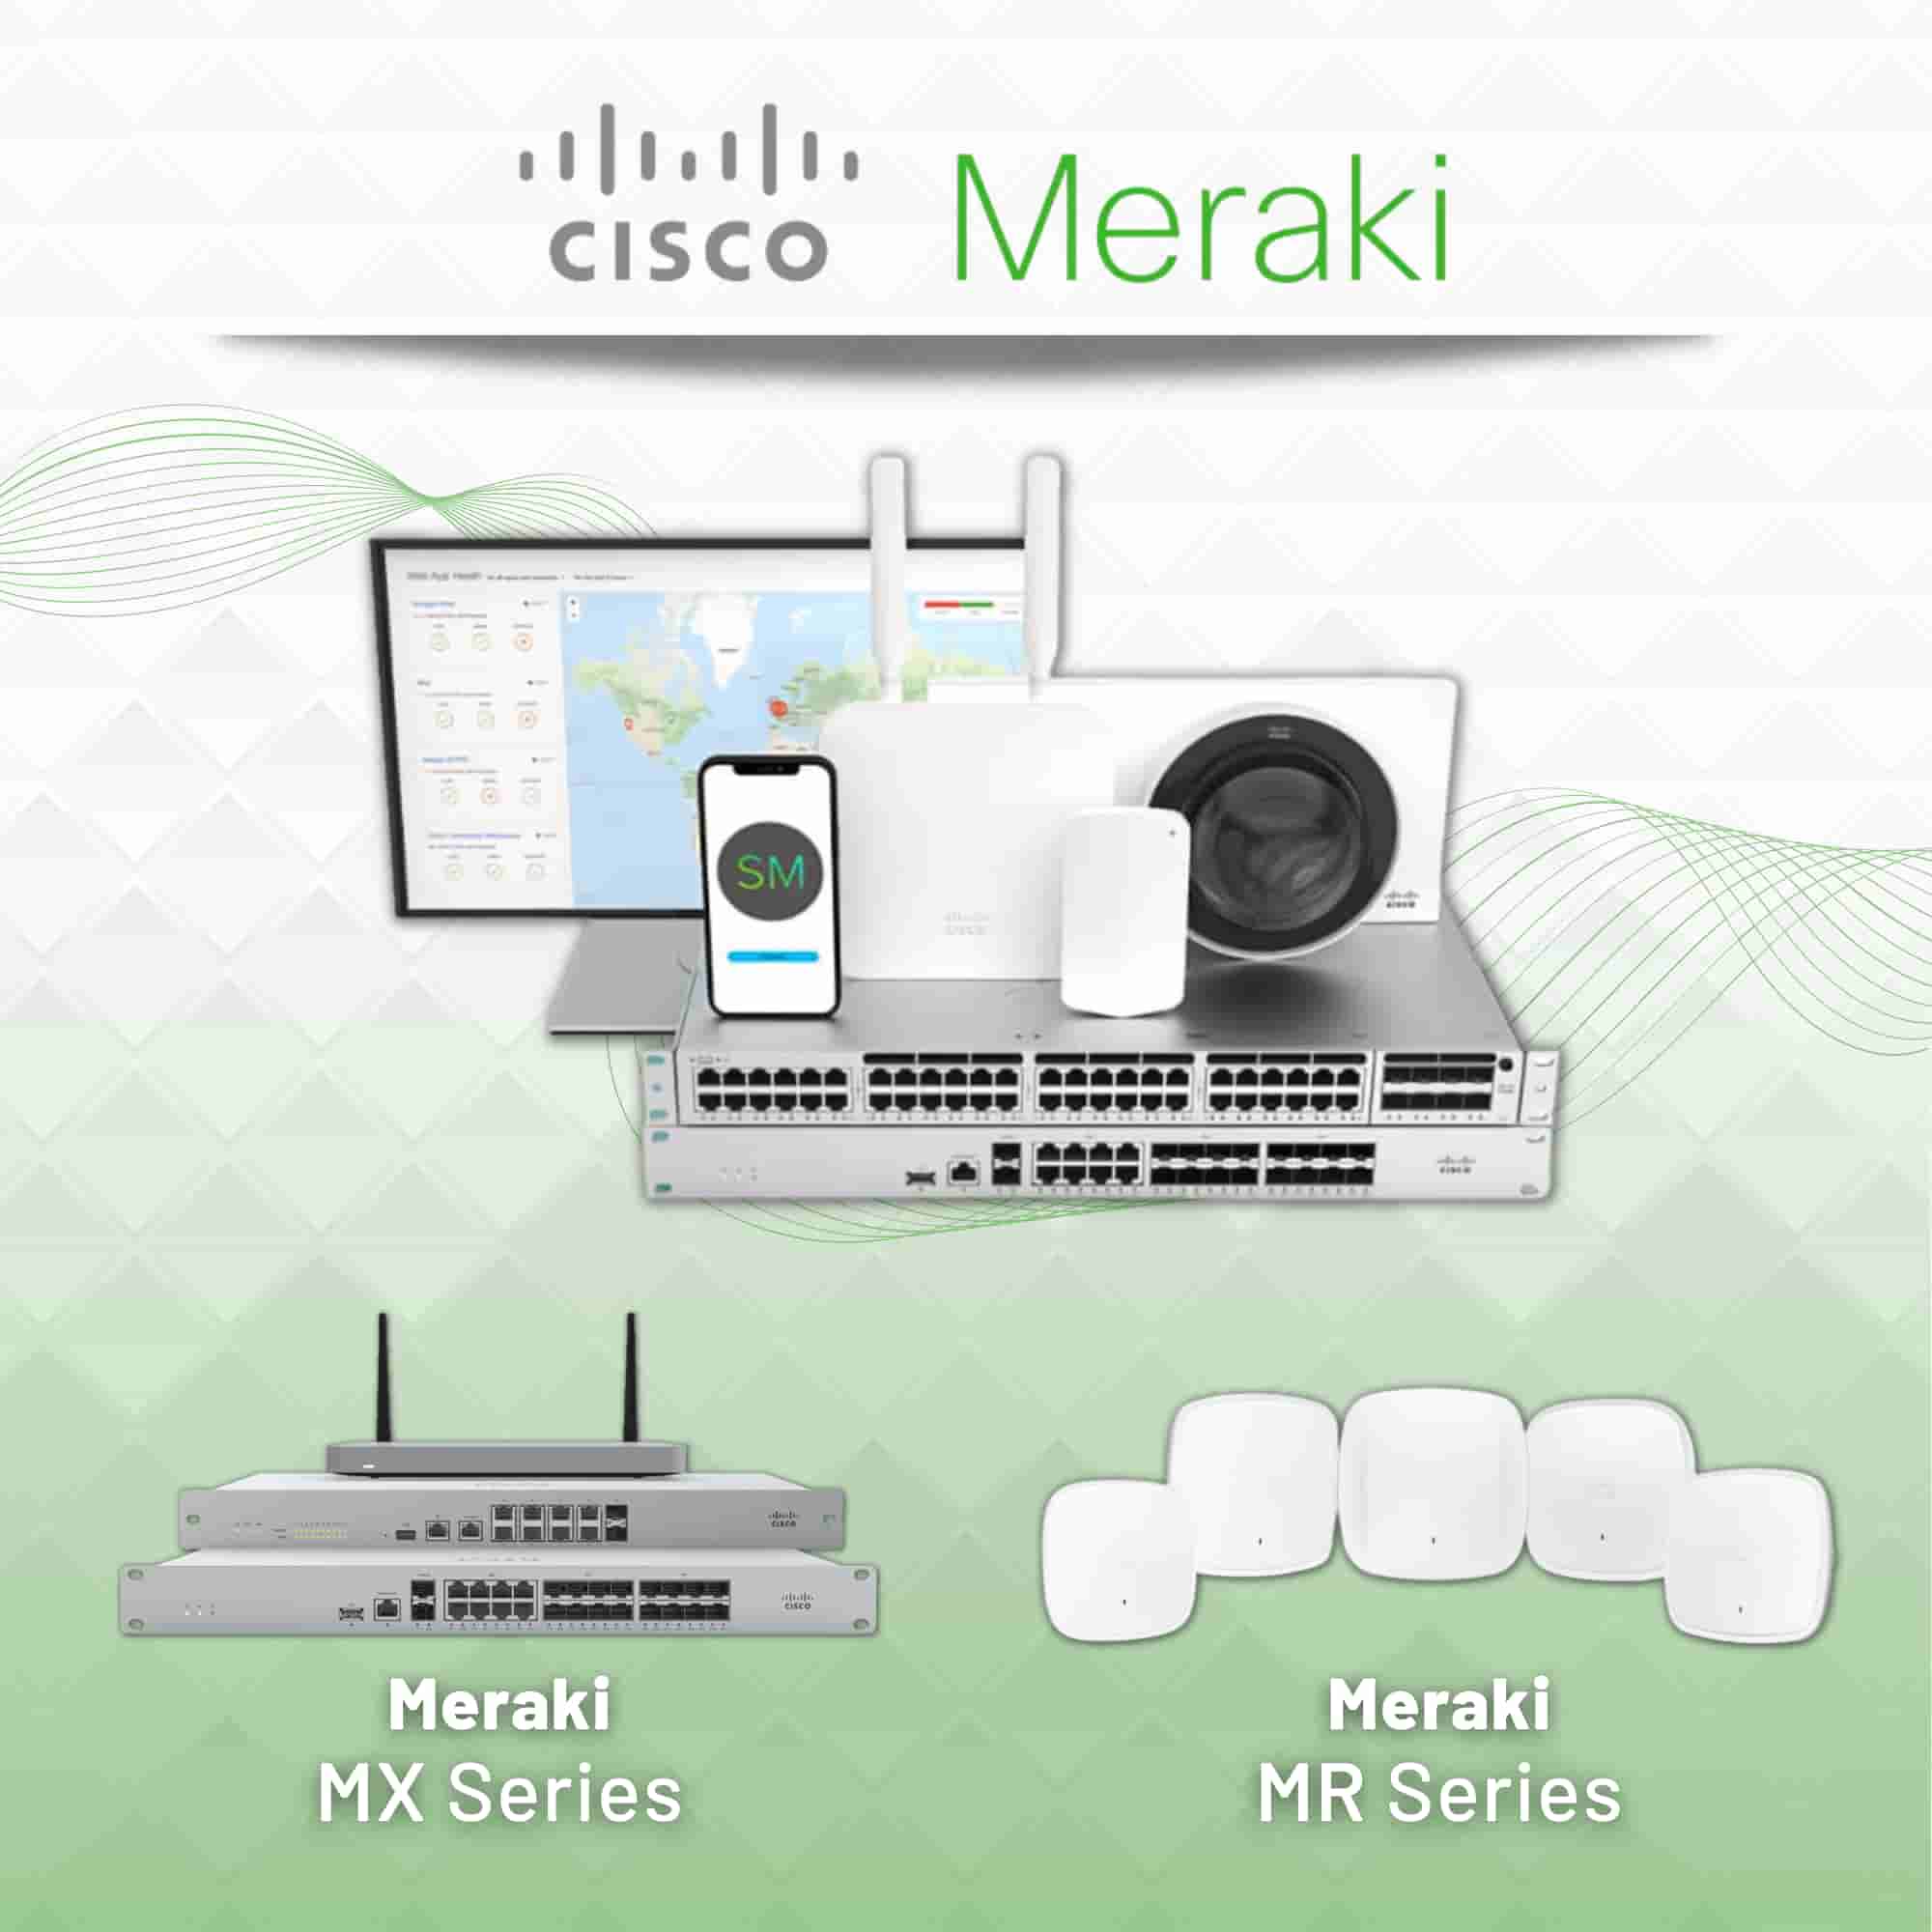 What are the latest Meraki products?